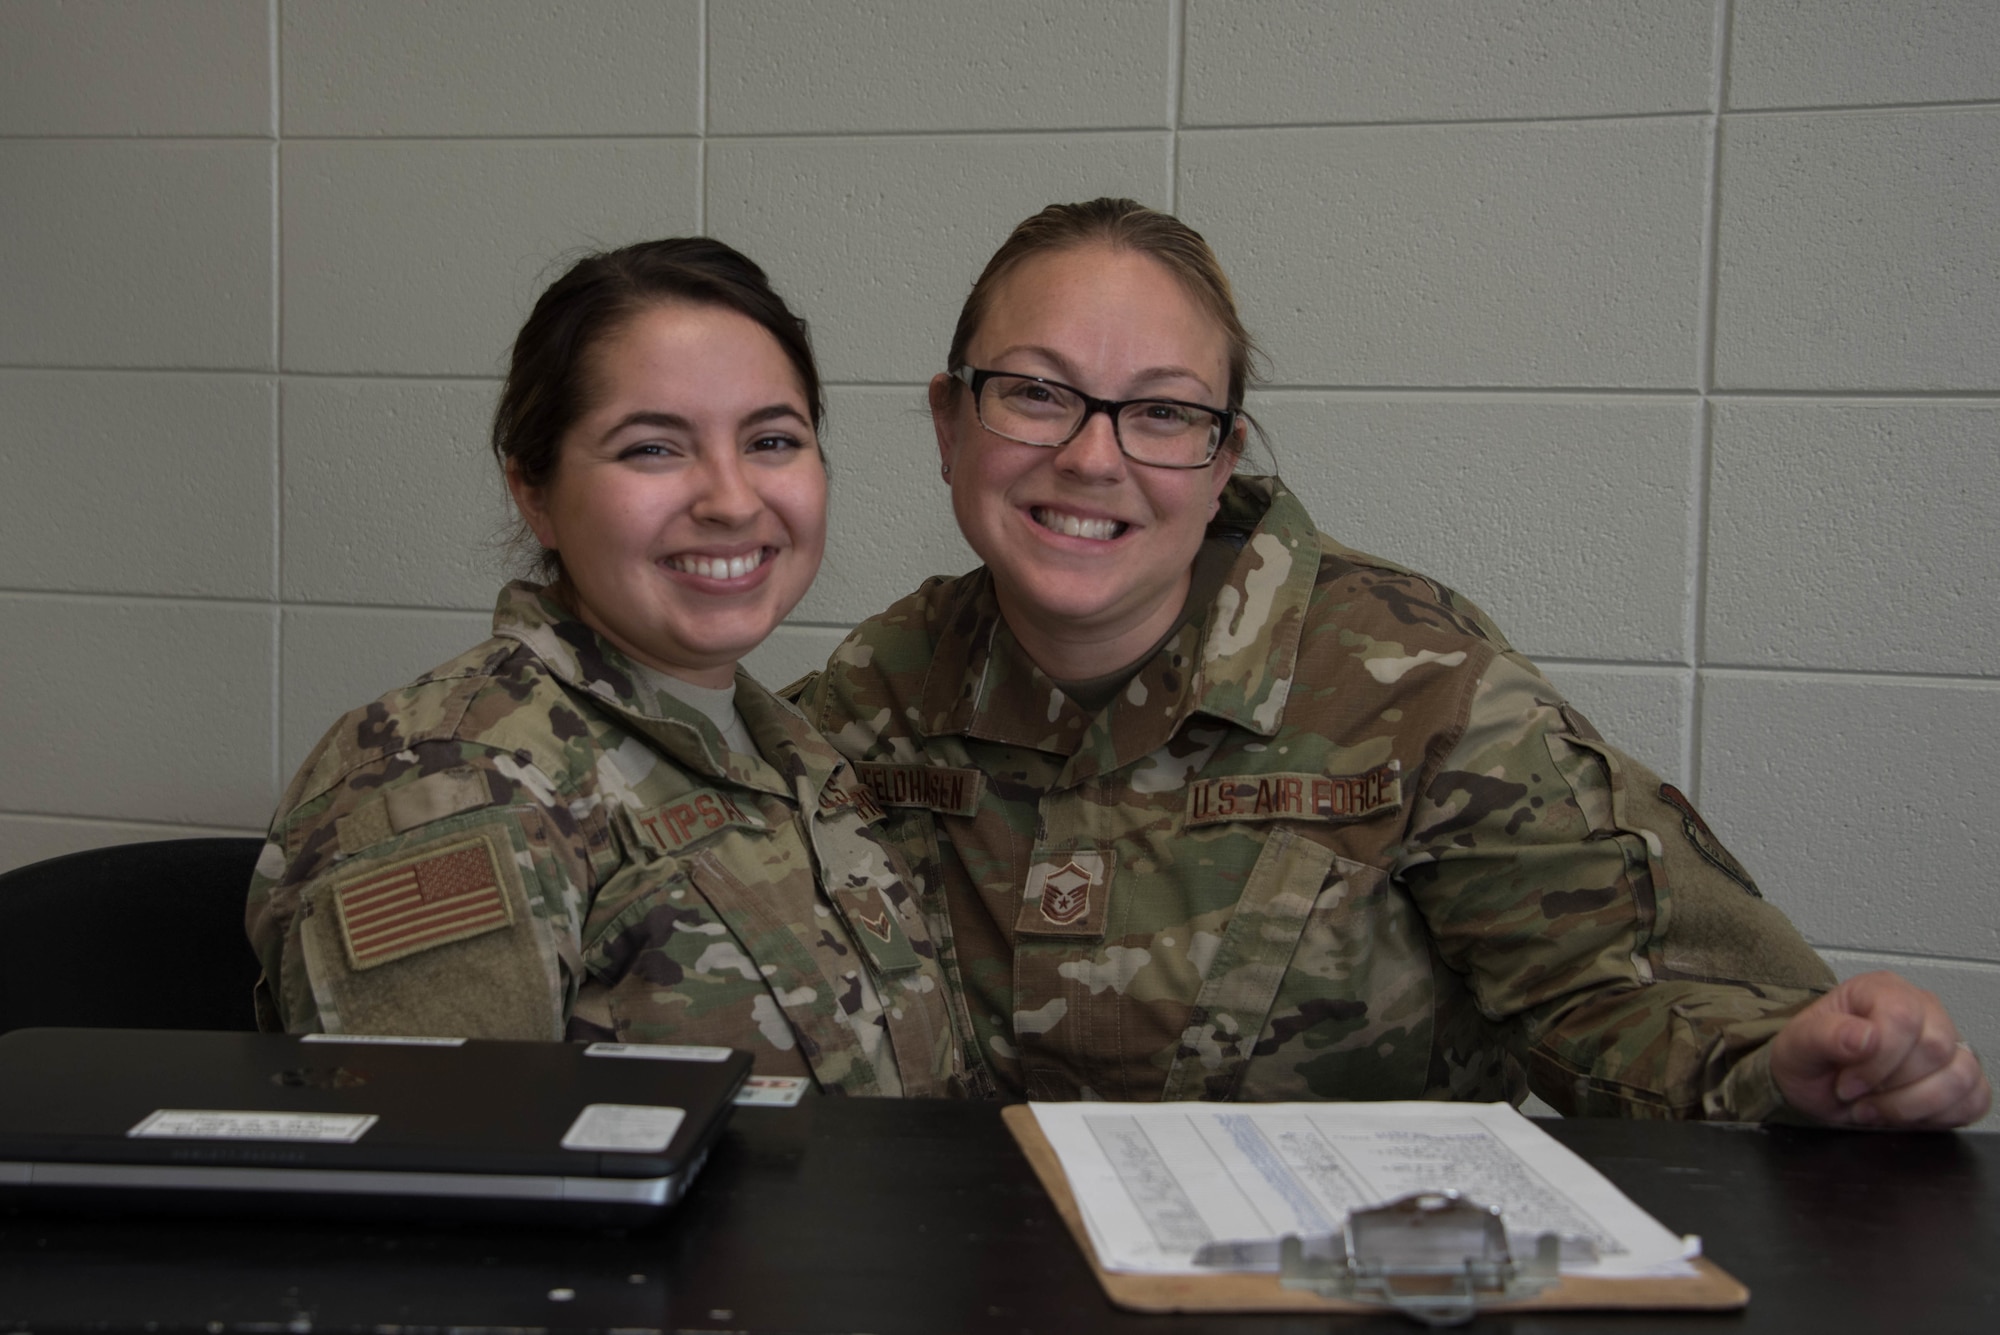 Air National Guard Airman 1st Class Kendall Stipsak, a medical administrator for the DAEOC Tri-State Innovative Readiness Training (IRT) 2019, and Air National Guard Master Sgt. Stephanie Feldhausen, the training noncommissioned officer in charge for the IRT, pose for a photo June 15, 2019, at Ballard Memorial High School in Barlow, Ky